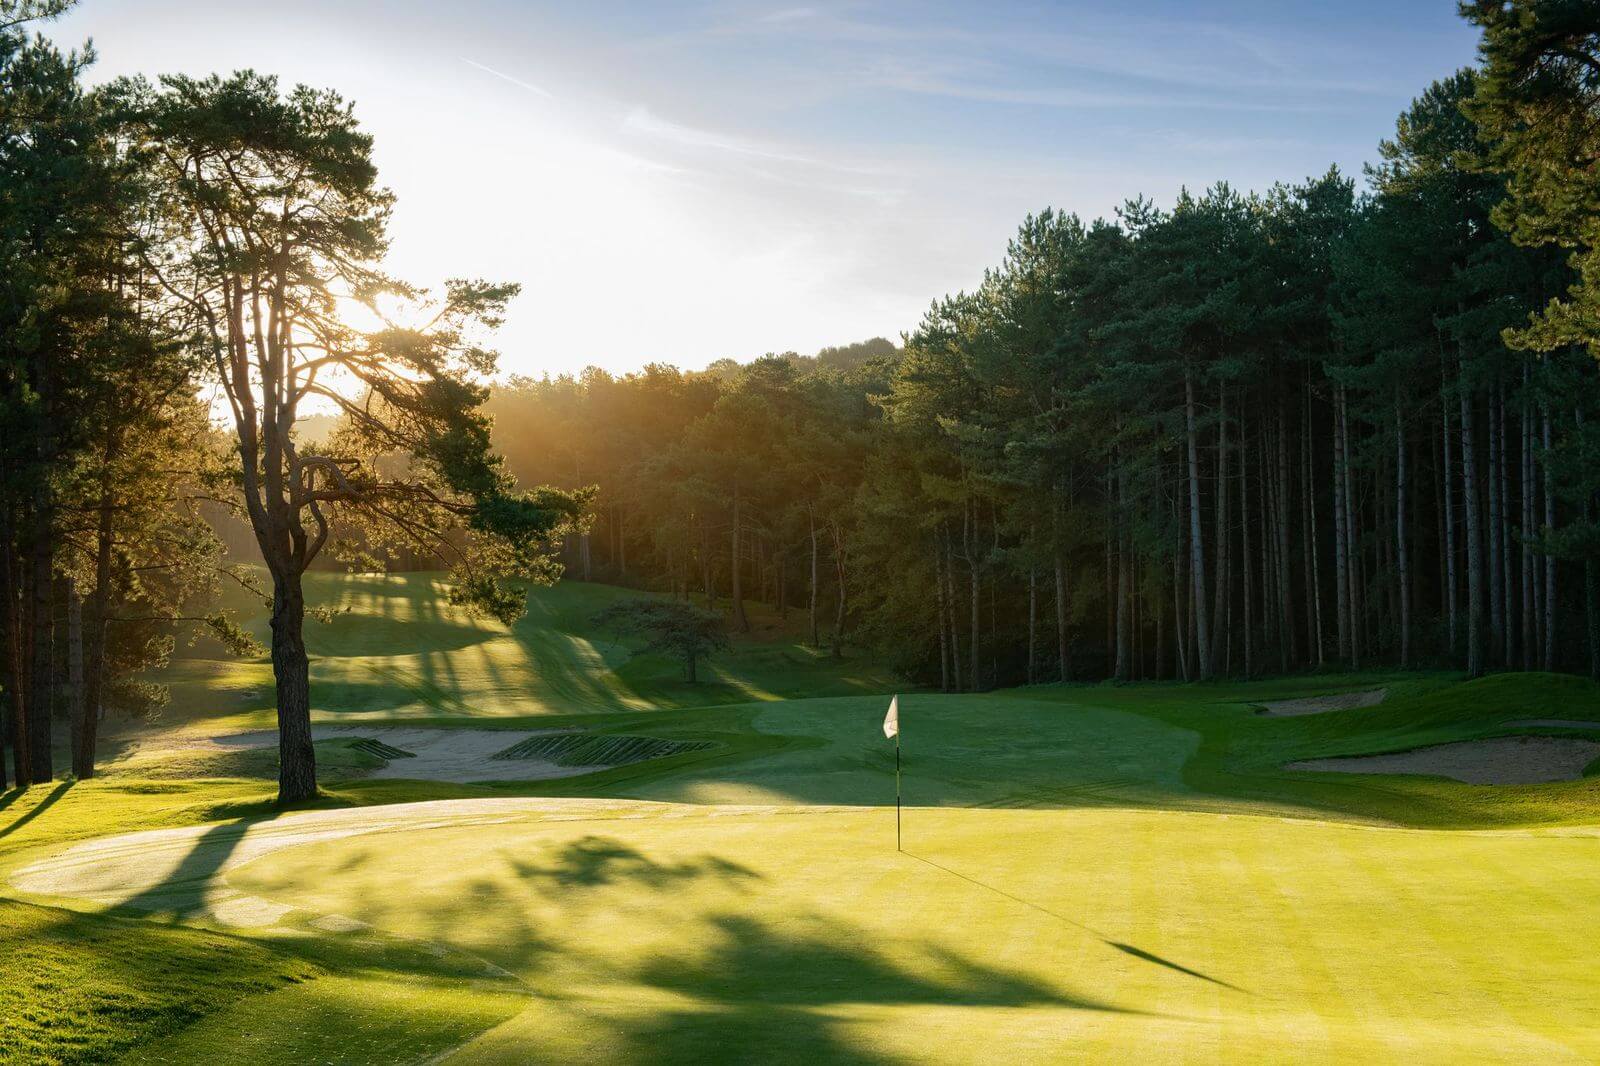 Sunrise over Hardelot's Les Dunes Golf Course on hole 1, with trees protecting the green fairway